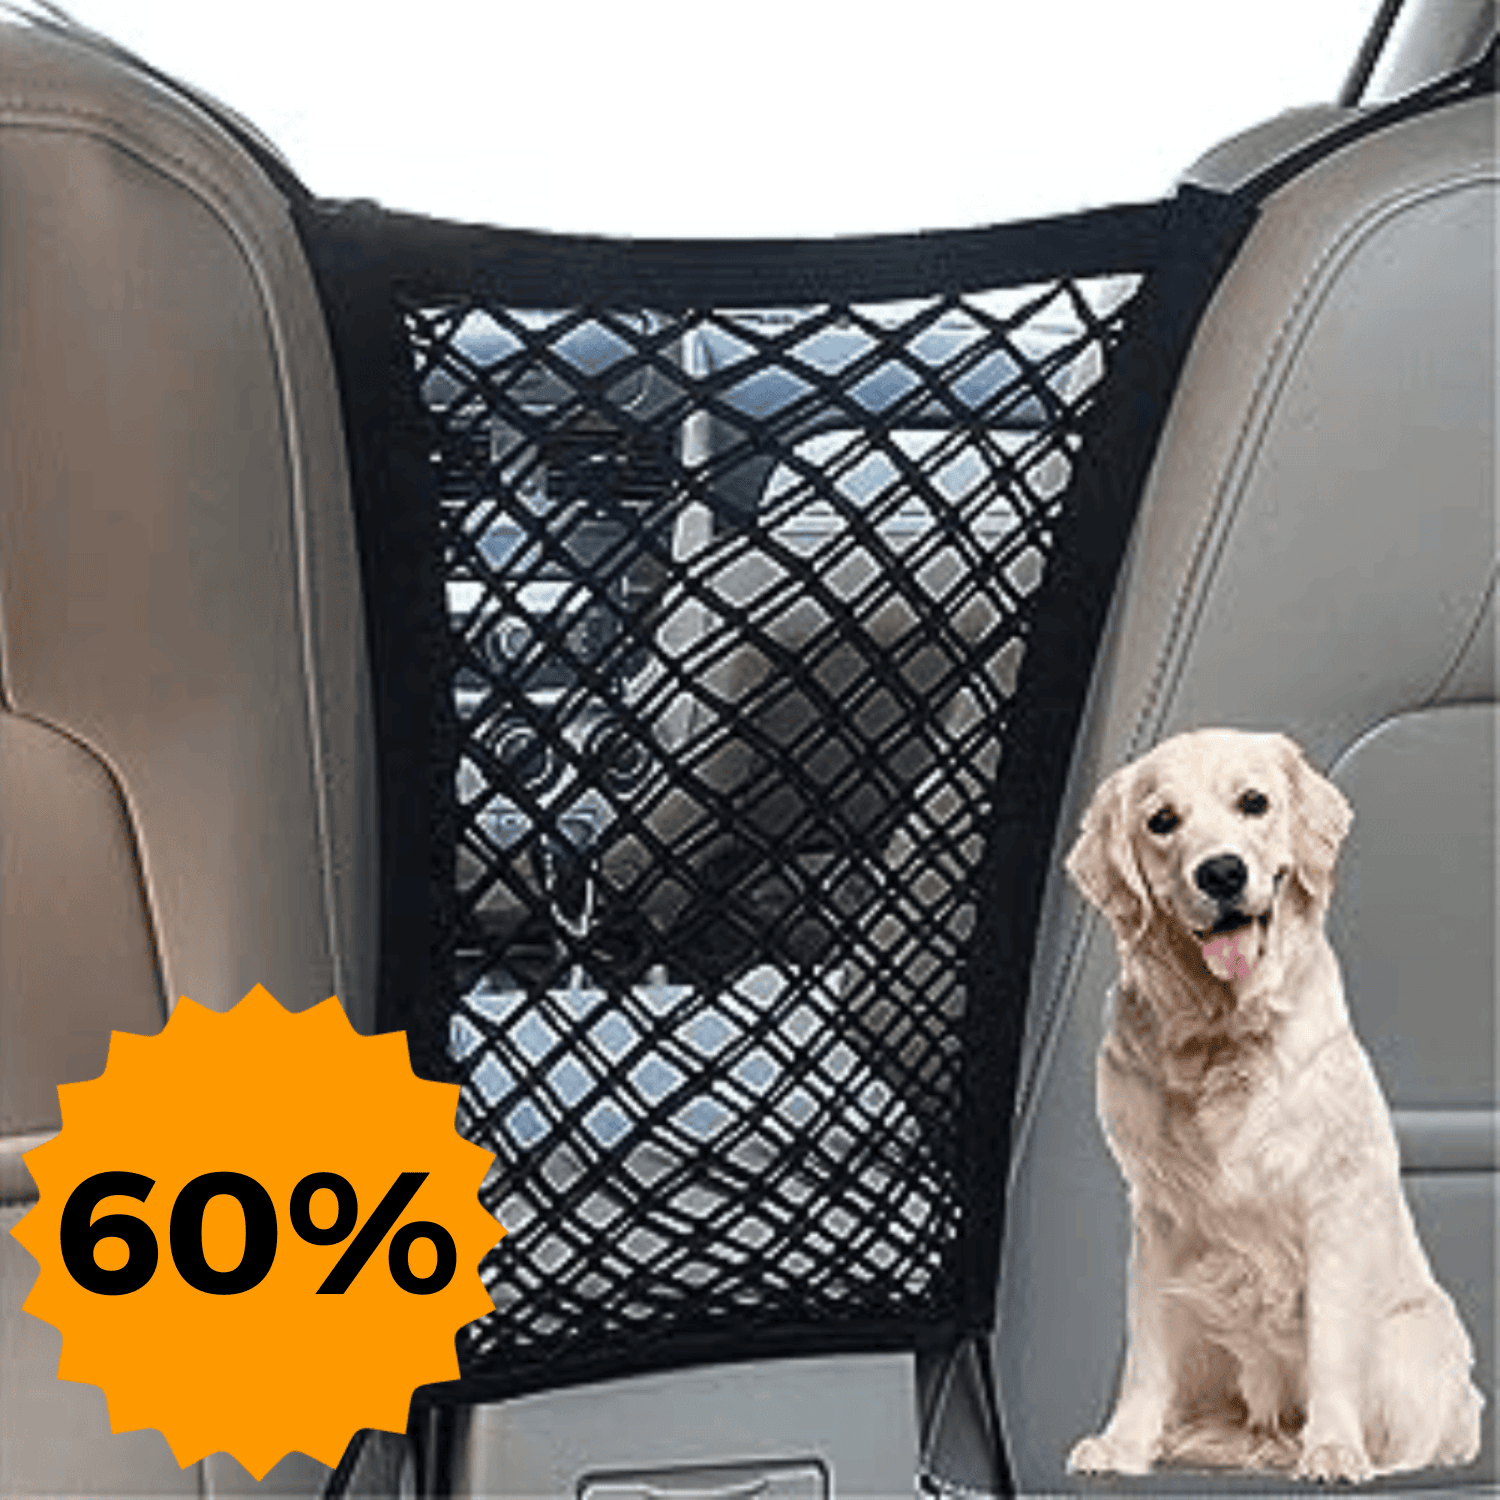 Extra Safety Net Barrier (drive distraction-free)